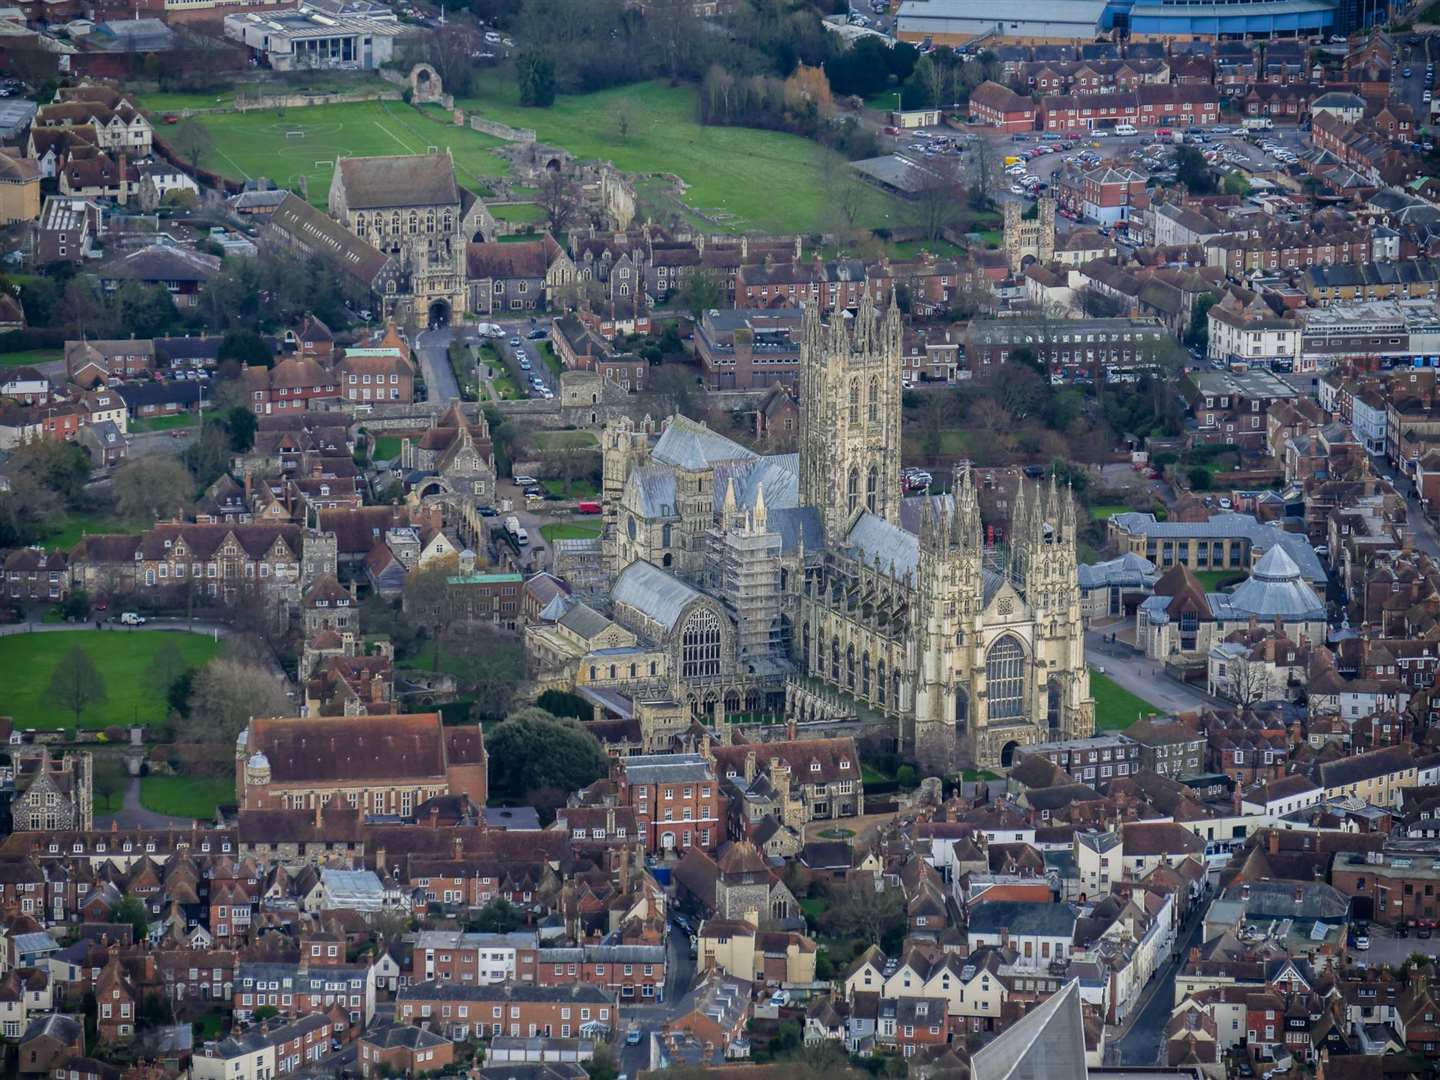 A view of Canterbury from the air. Picture: Getty Images/iStock/Paul Stevens